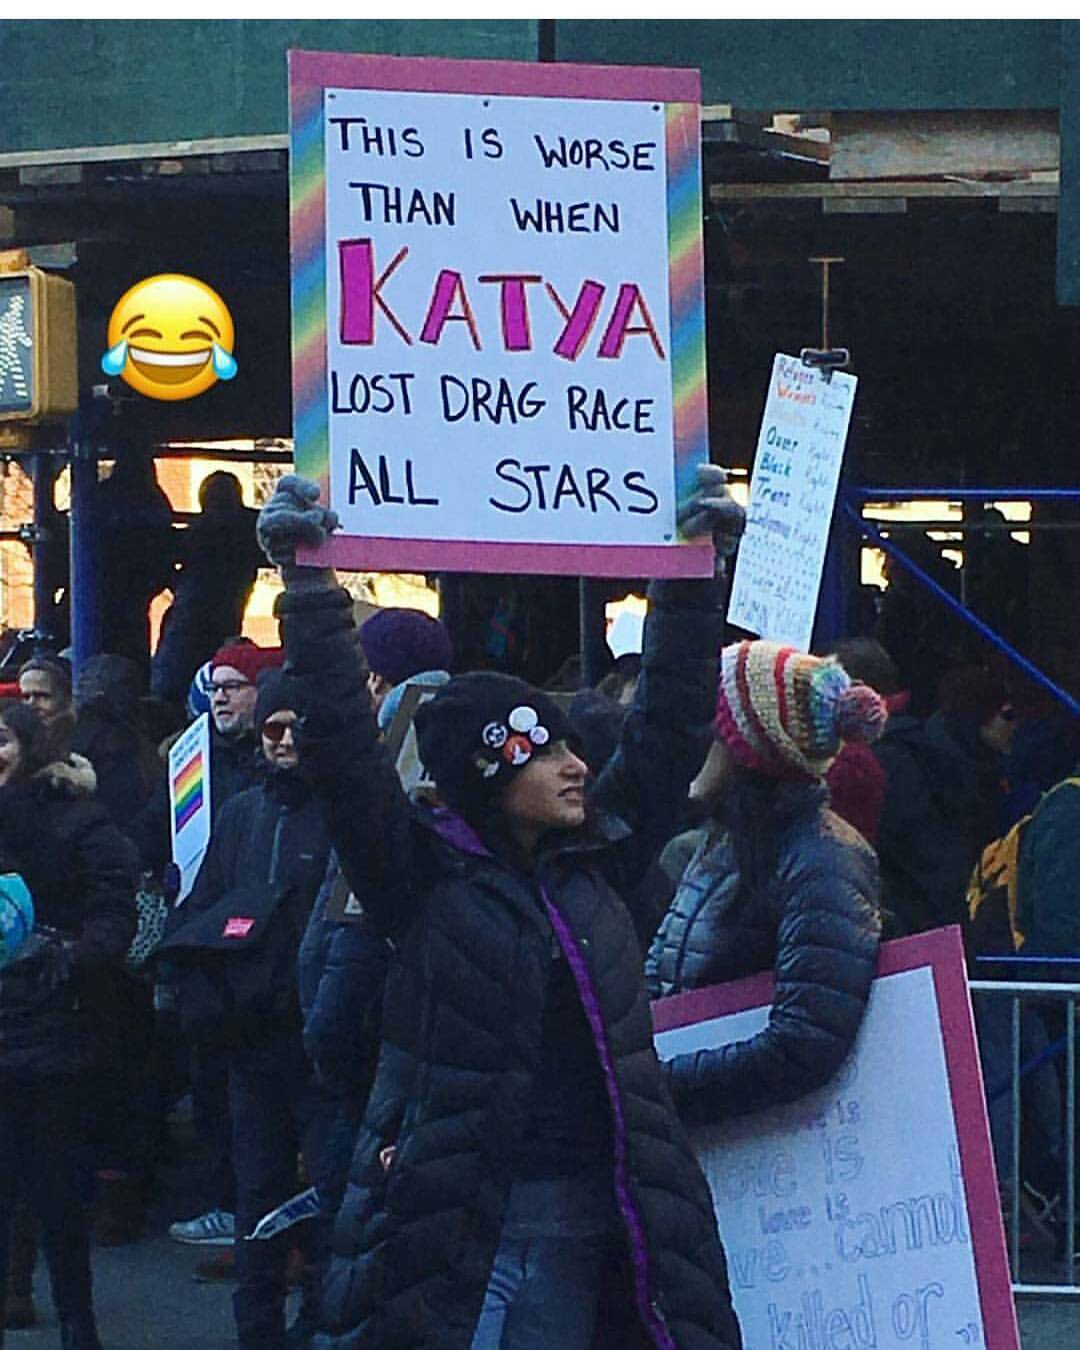 Found my favourite sign from the protests. 😂 💖💖 #rupaulsdragrace #rupaul